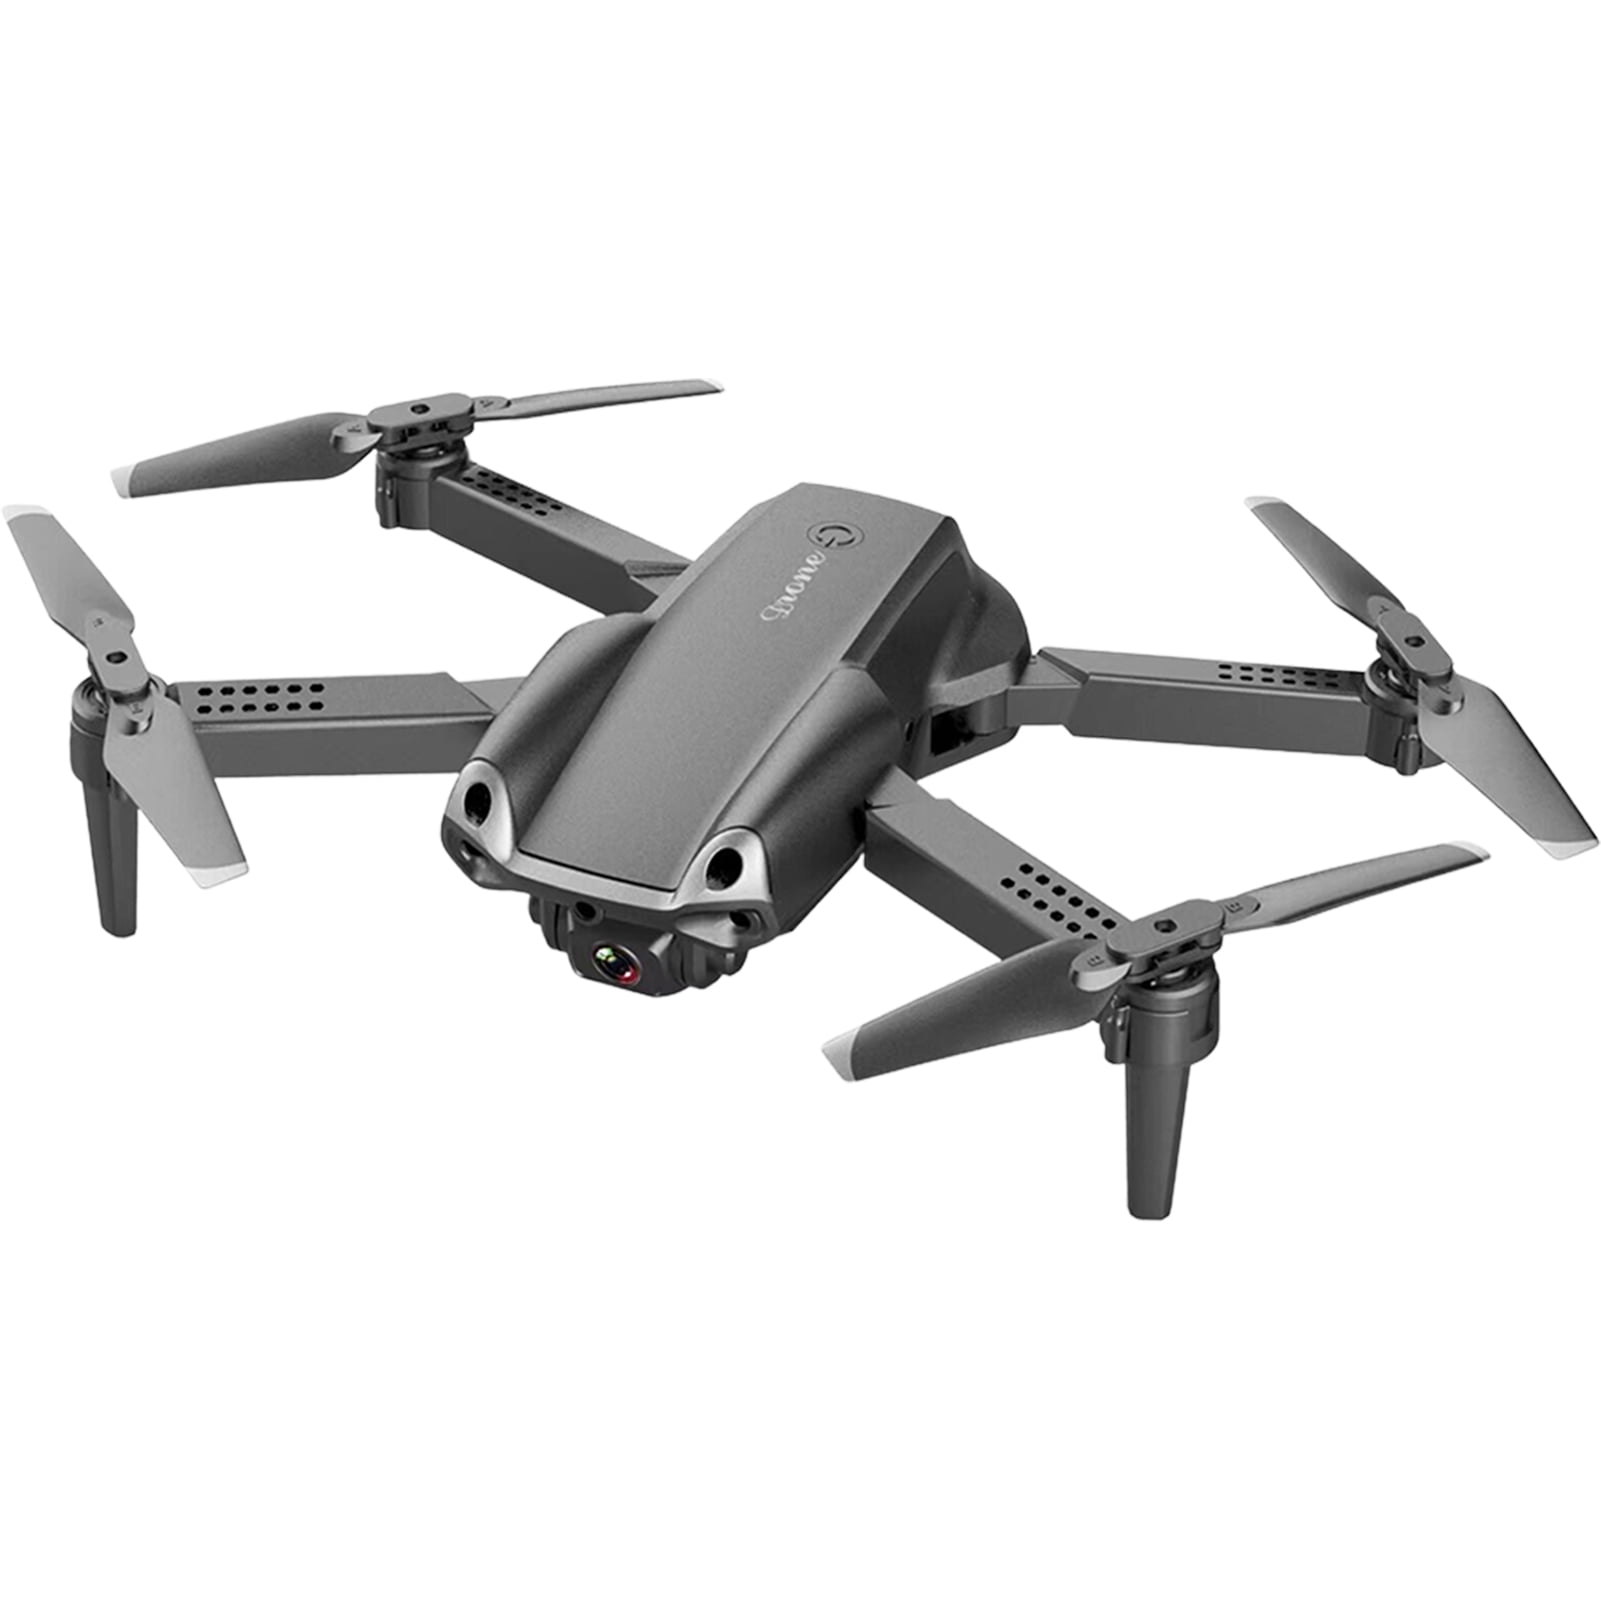 Foldable Drone | Drones for Adults Kids Wind Resistance | S6 Drone 3-speed Switching, 20-min Flight Time Camera Drone Altitude Hold for Beginners Toys - Walmart.com